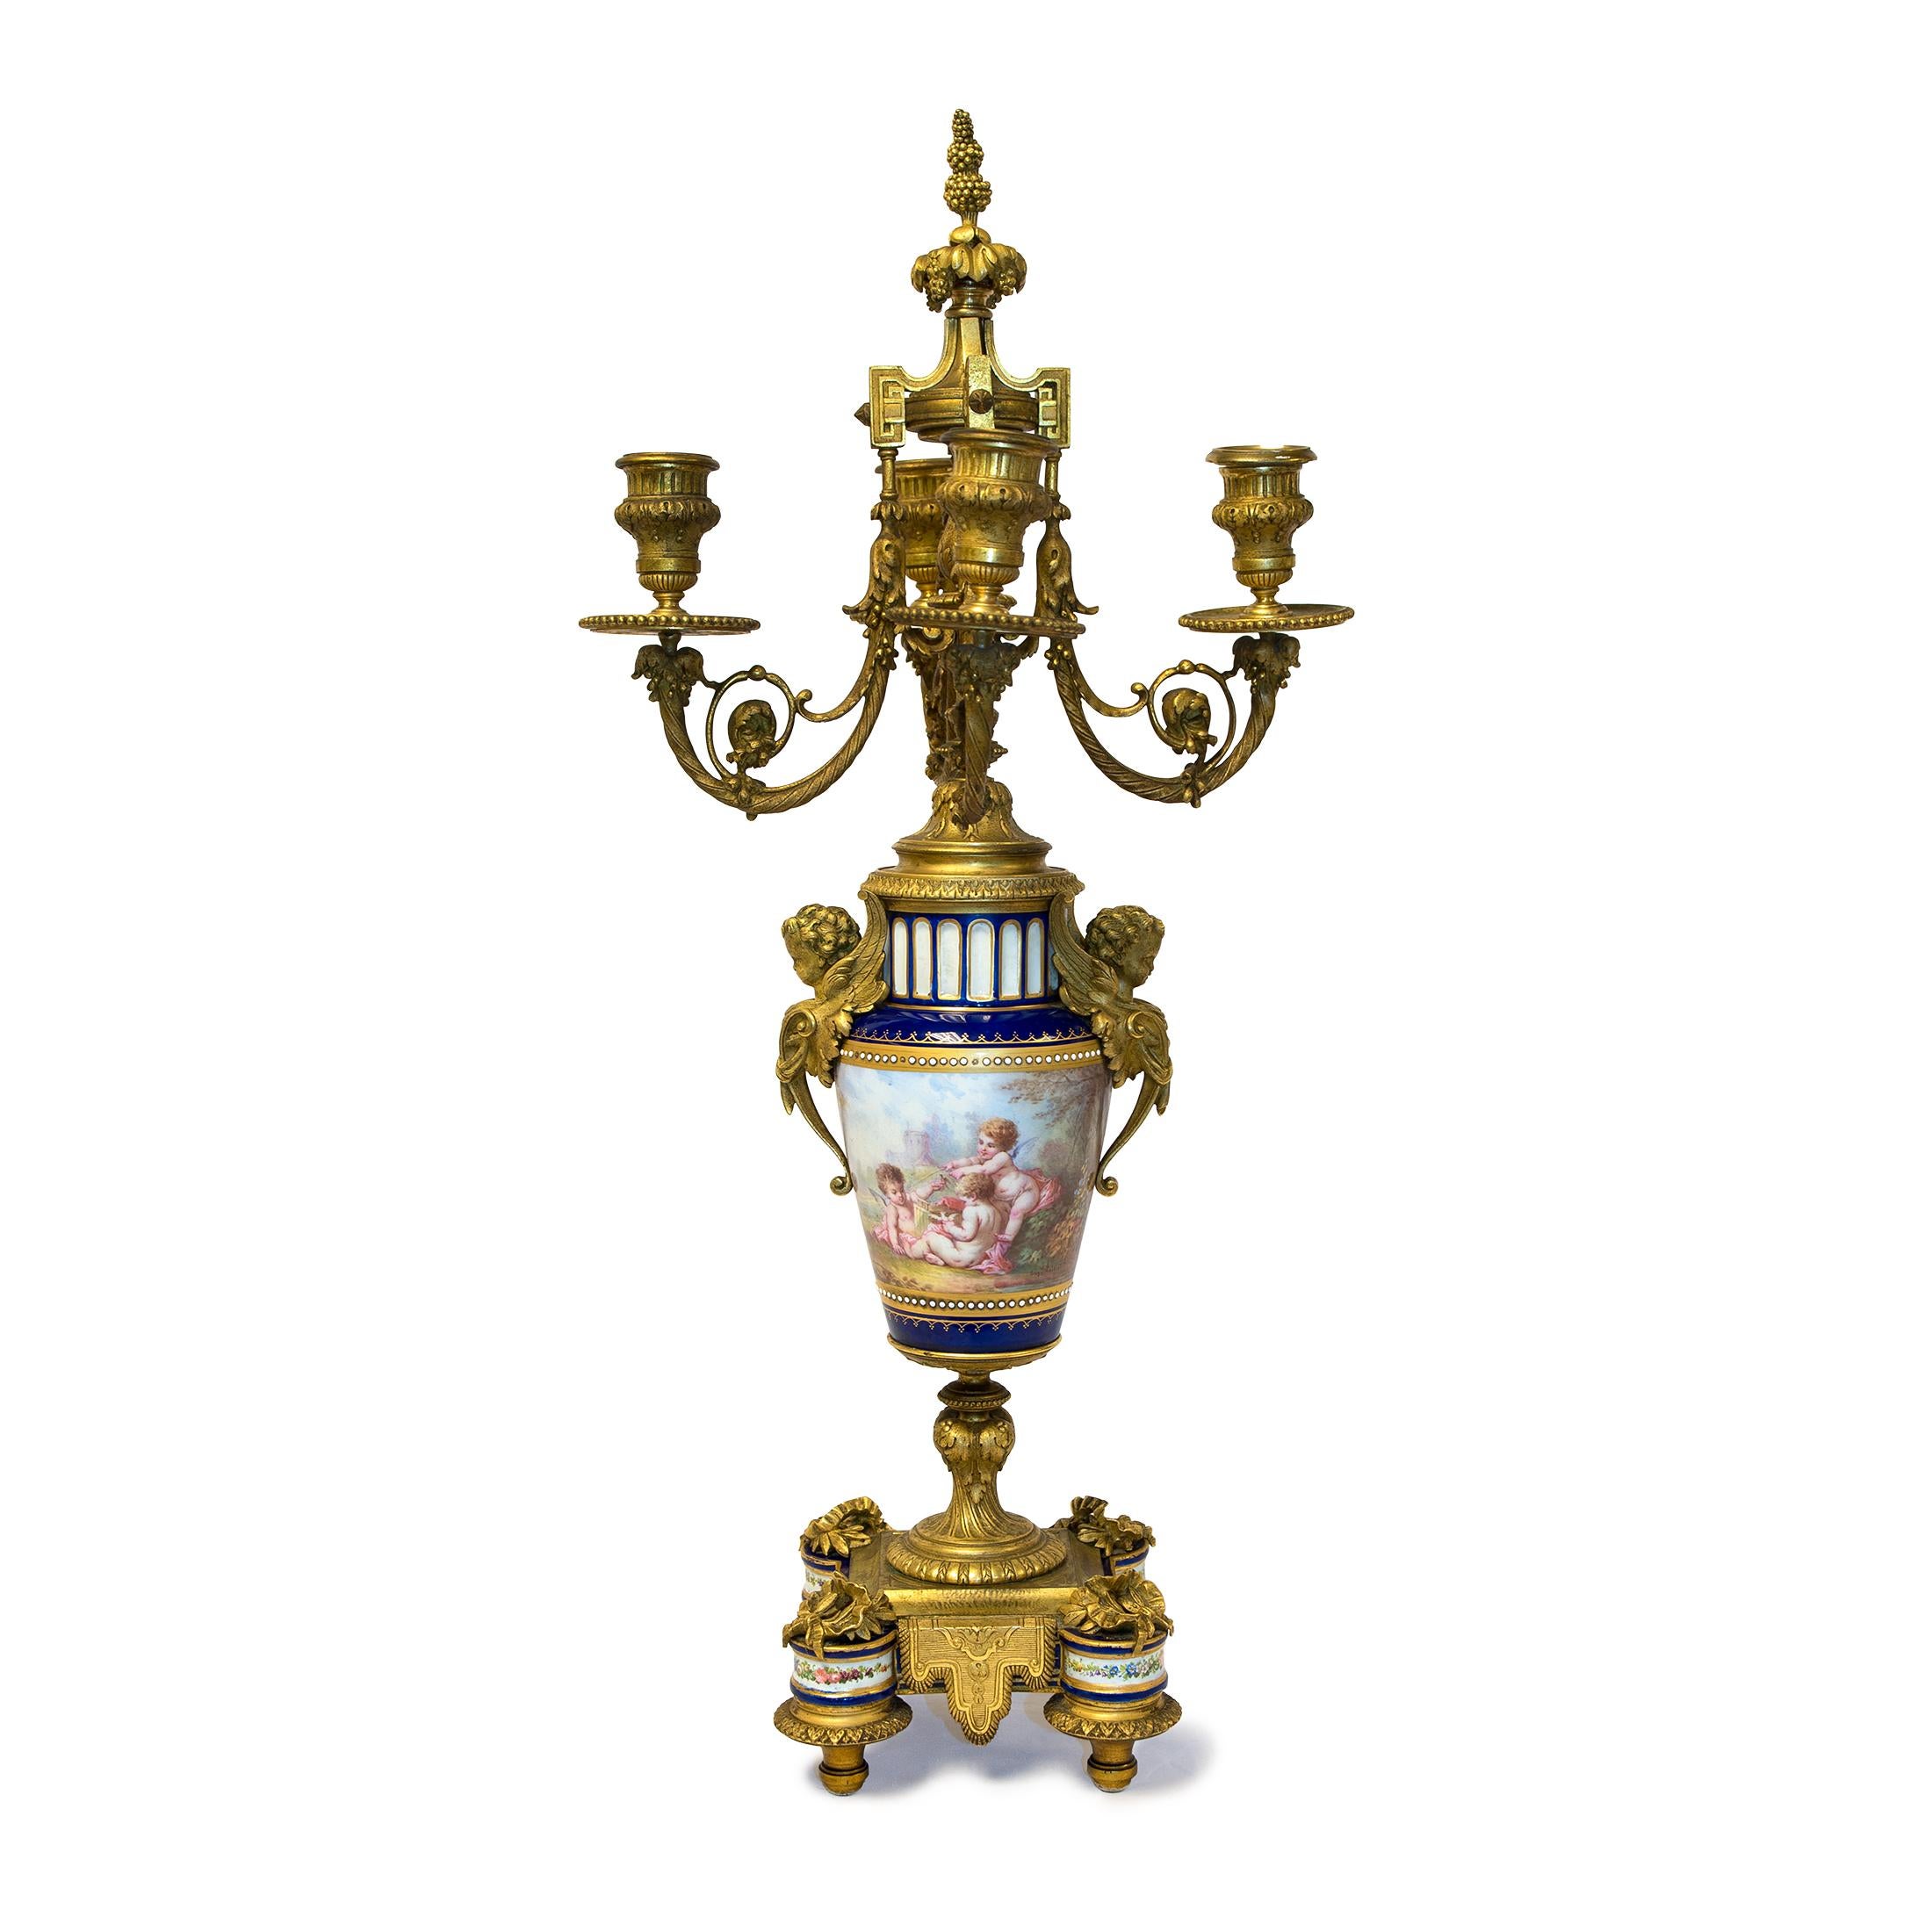 French Rare Pair of Four-Branch Gilt Bronze & Jeweled Sèvres Style Porcelain Candelabra For Sale